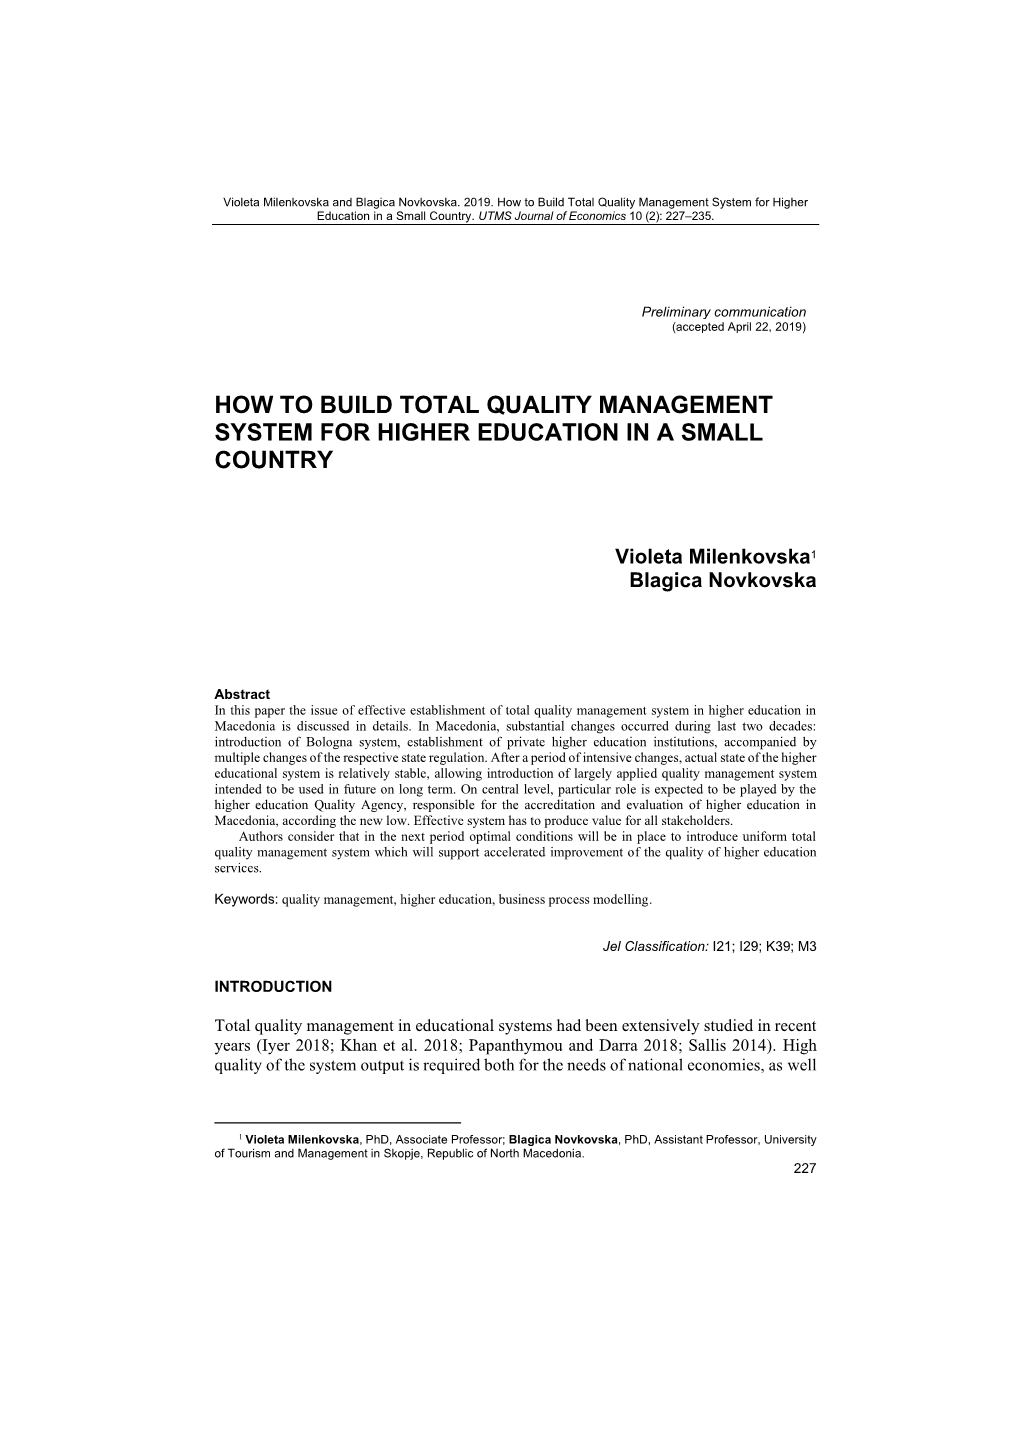 How to Build Total Quality Management System for Higher Education in a Small Country